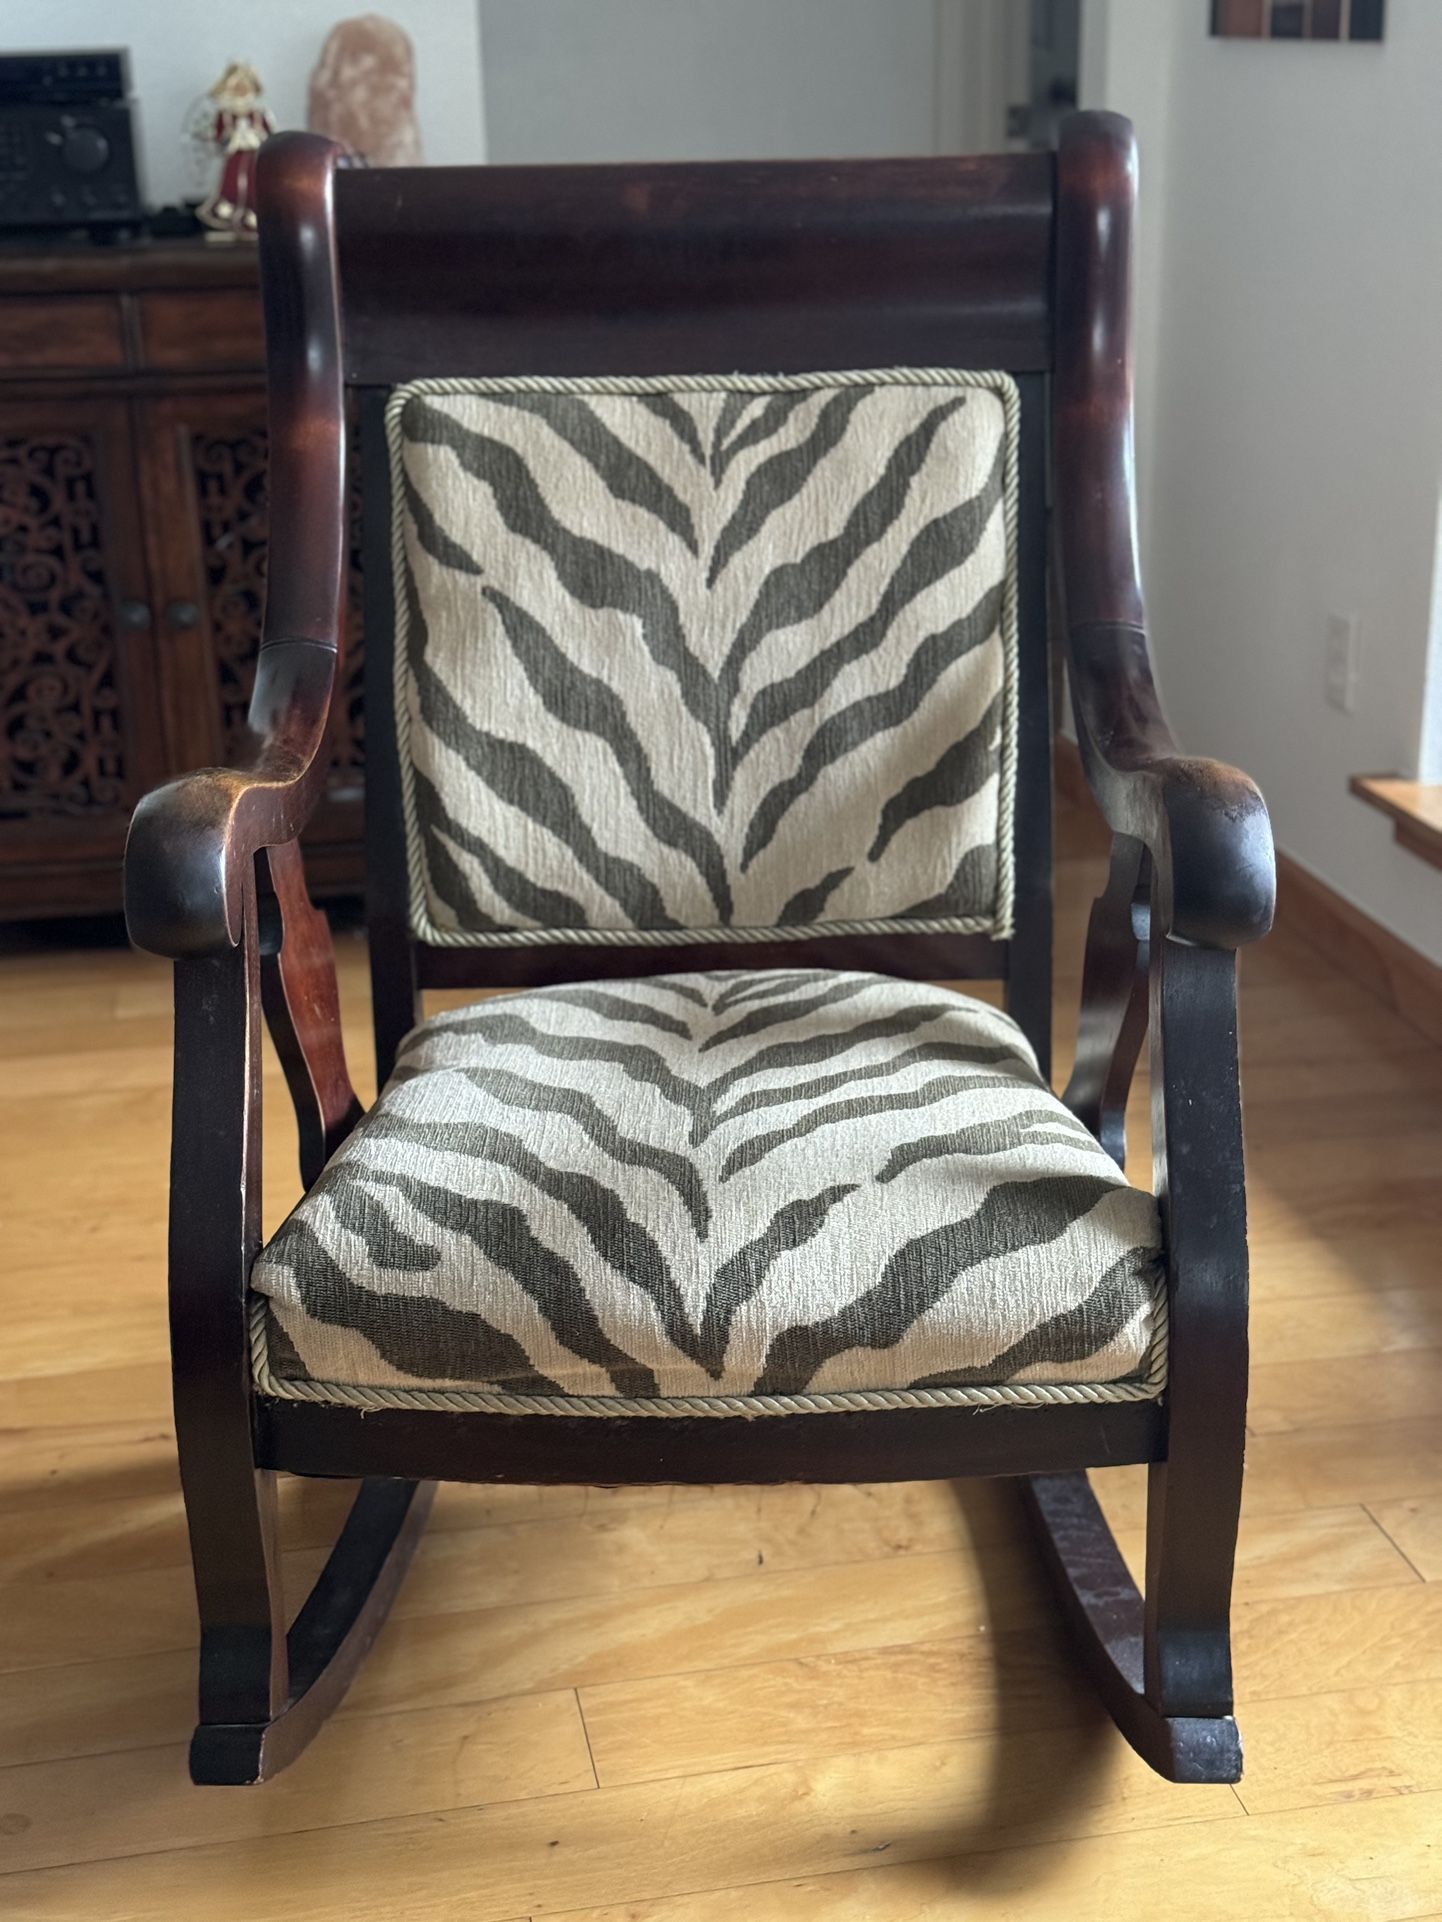 antique rocking chair, baby rocking chair, animal print rocking chair, zebra wood rocking chair, Heavy Wood Rocking Chair, Zebra Rocking Chair 